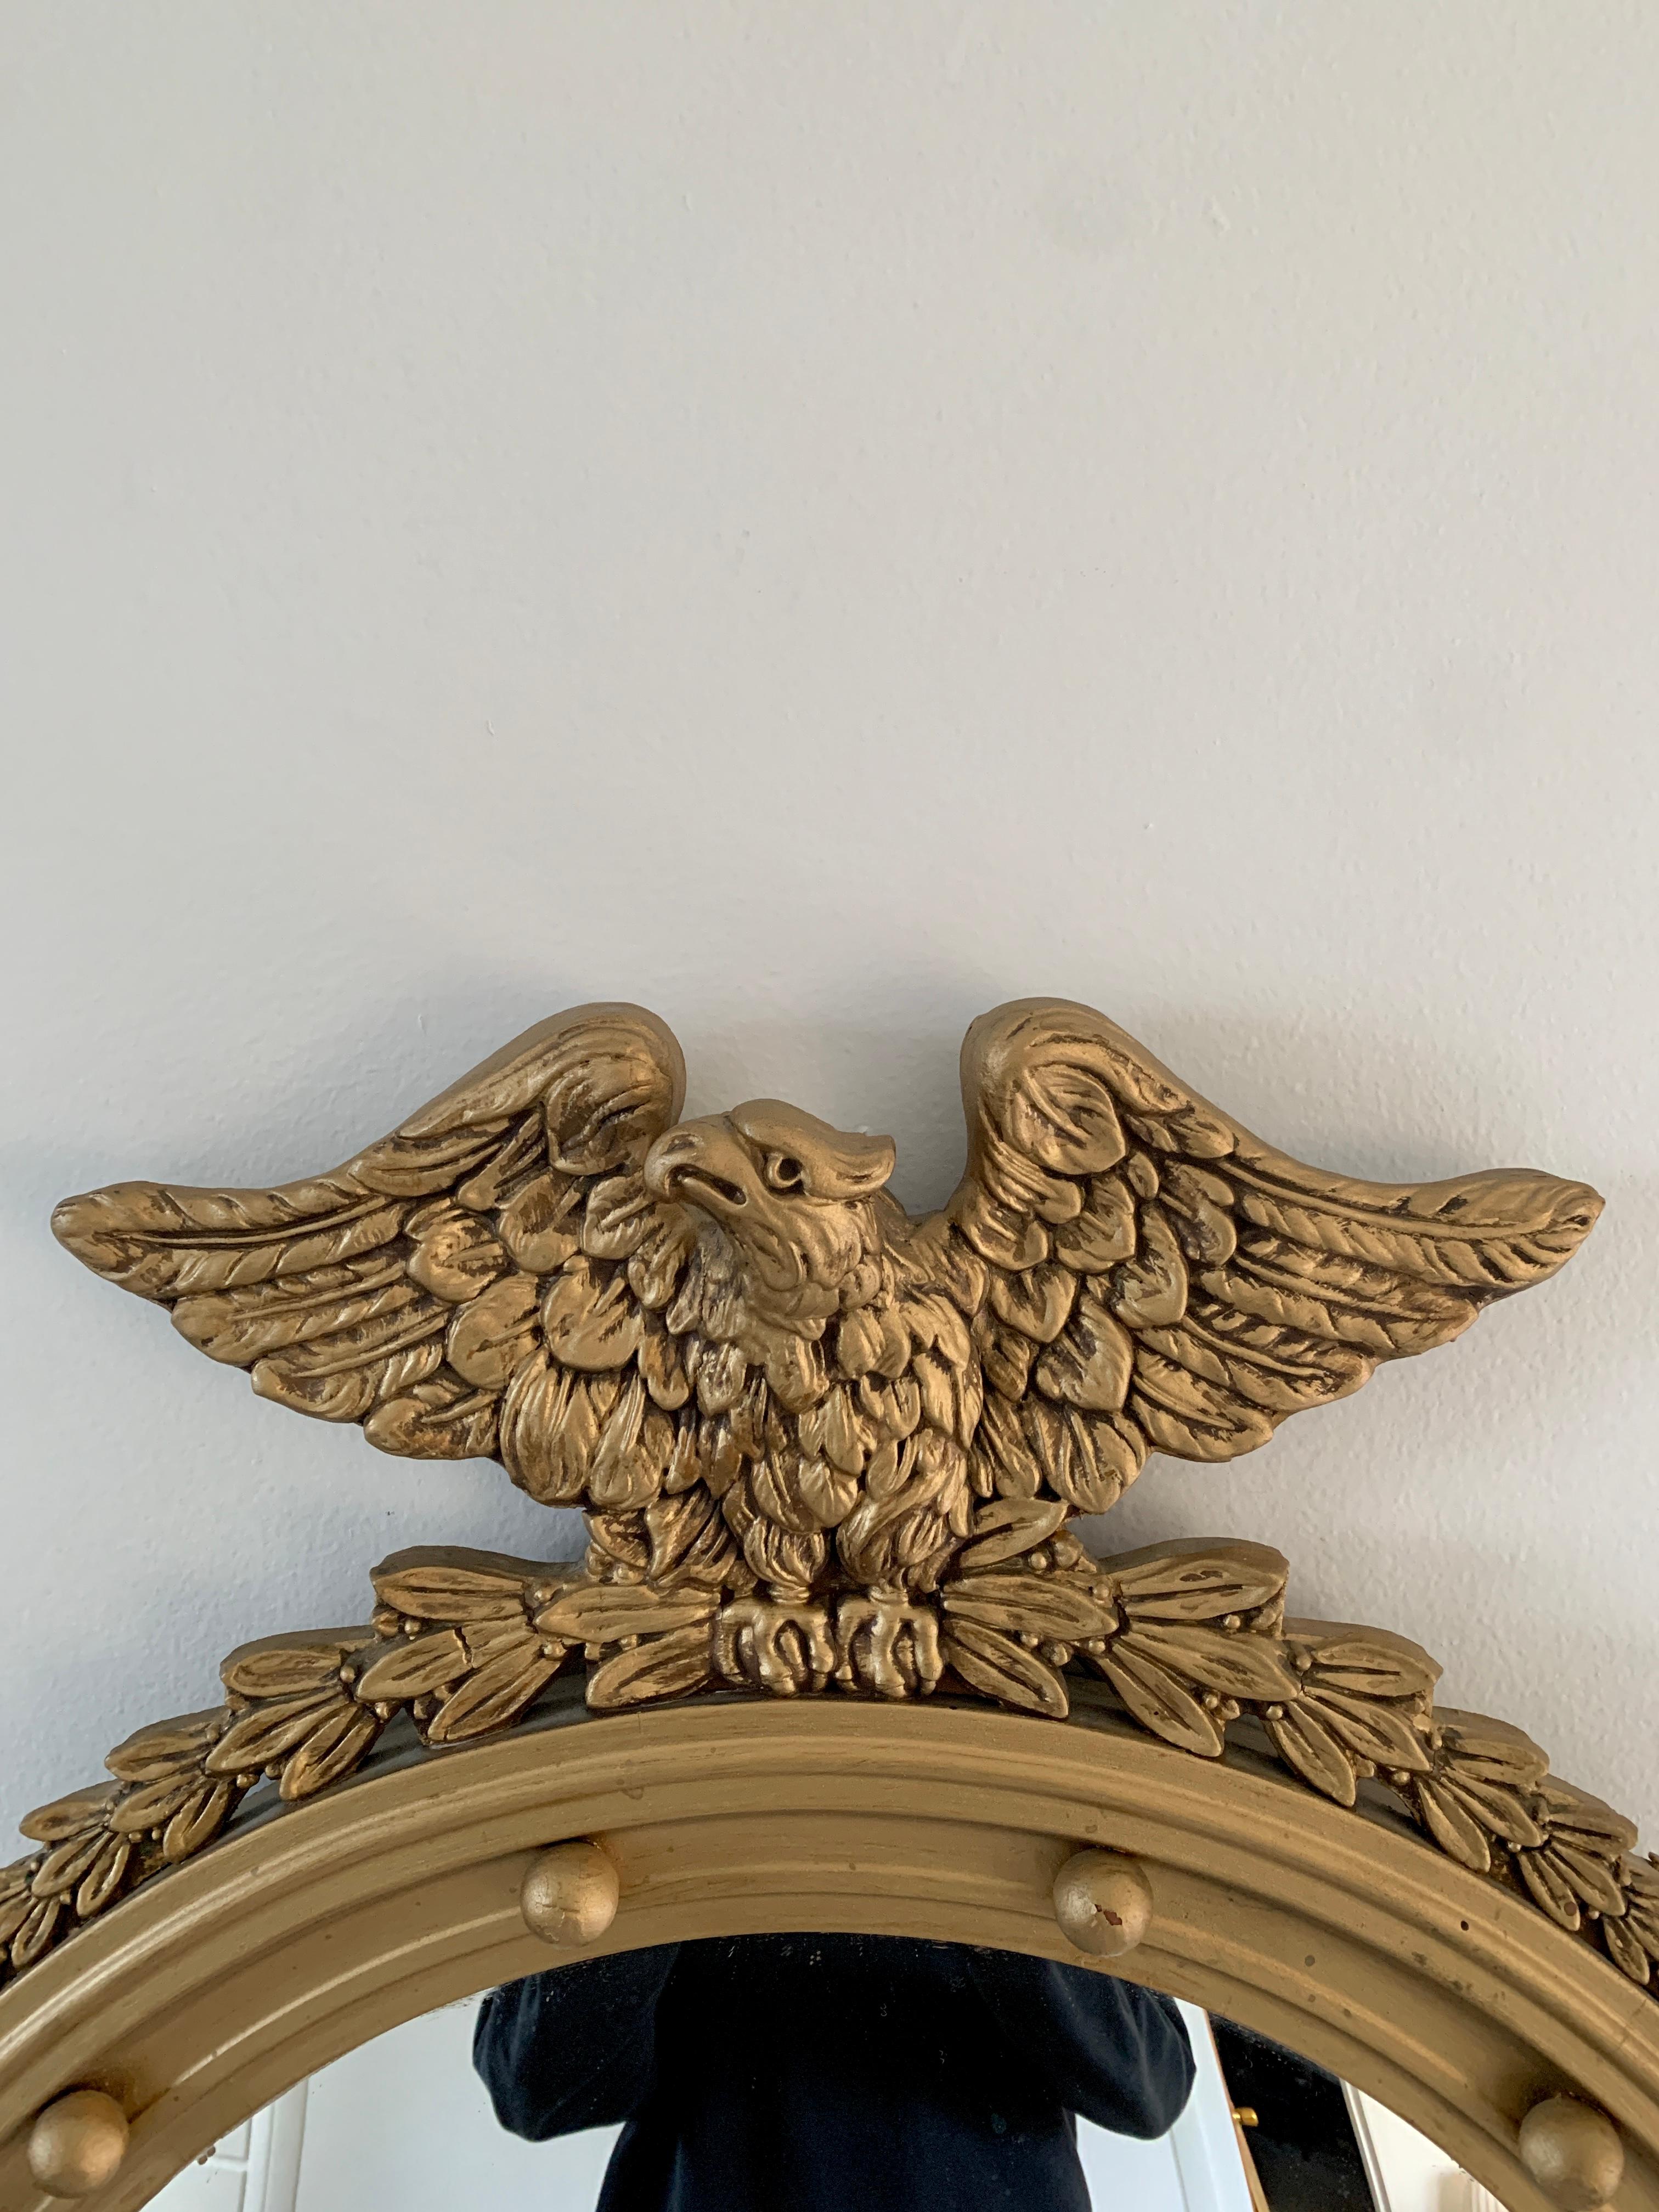 A gorgeous Federal or Regency style convex bullseye wall mirror featuring a carved eagle with open wings standing on olive branches and 13 small spheres representing the original 13 colonies around the inside perimeter.

USA, late 19th